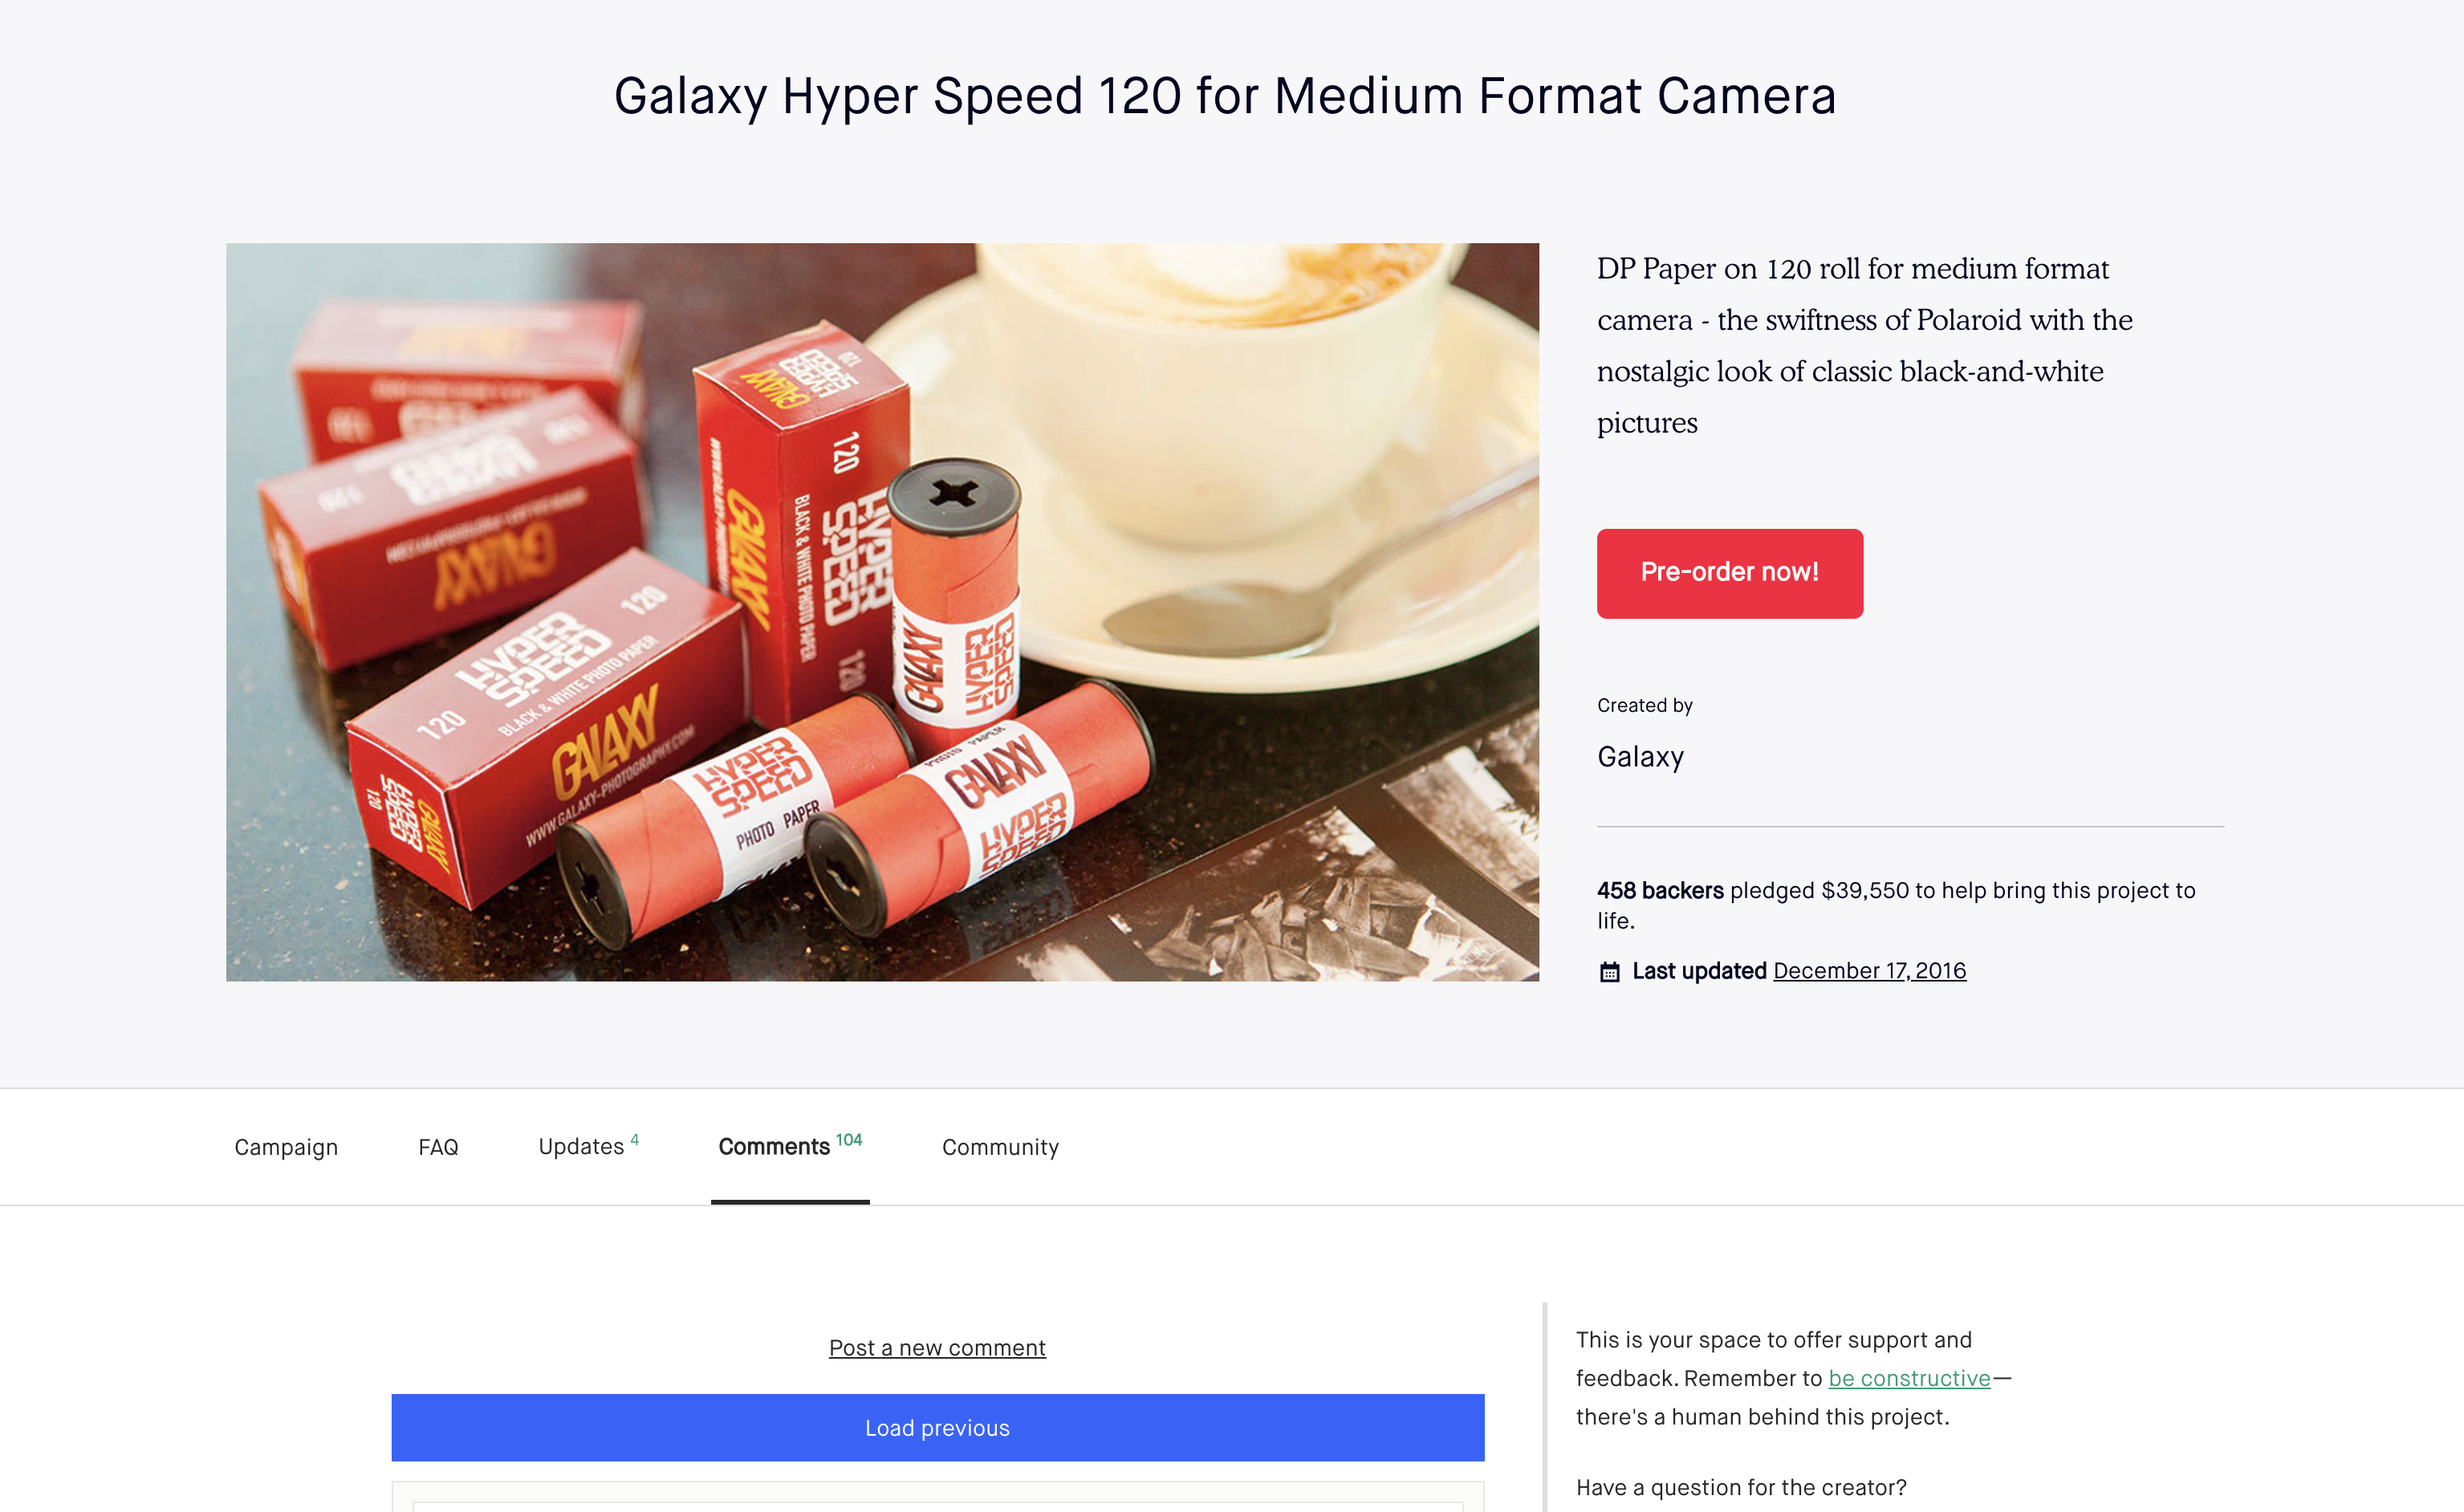 Galaxy: The Kickstarter That Stole Nearly $70,000 From Photographers